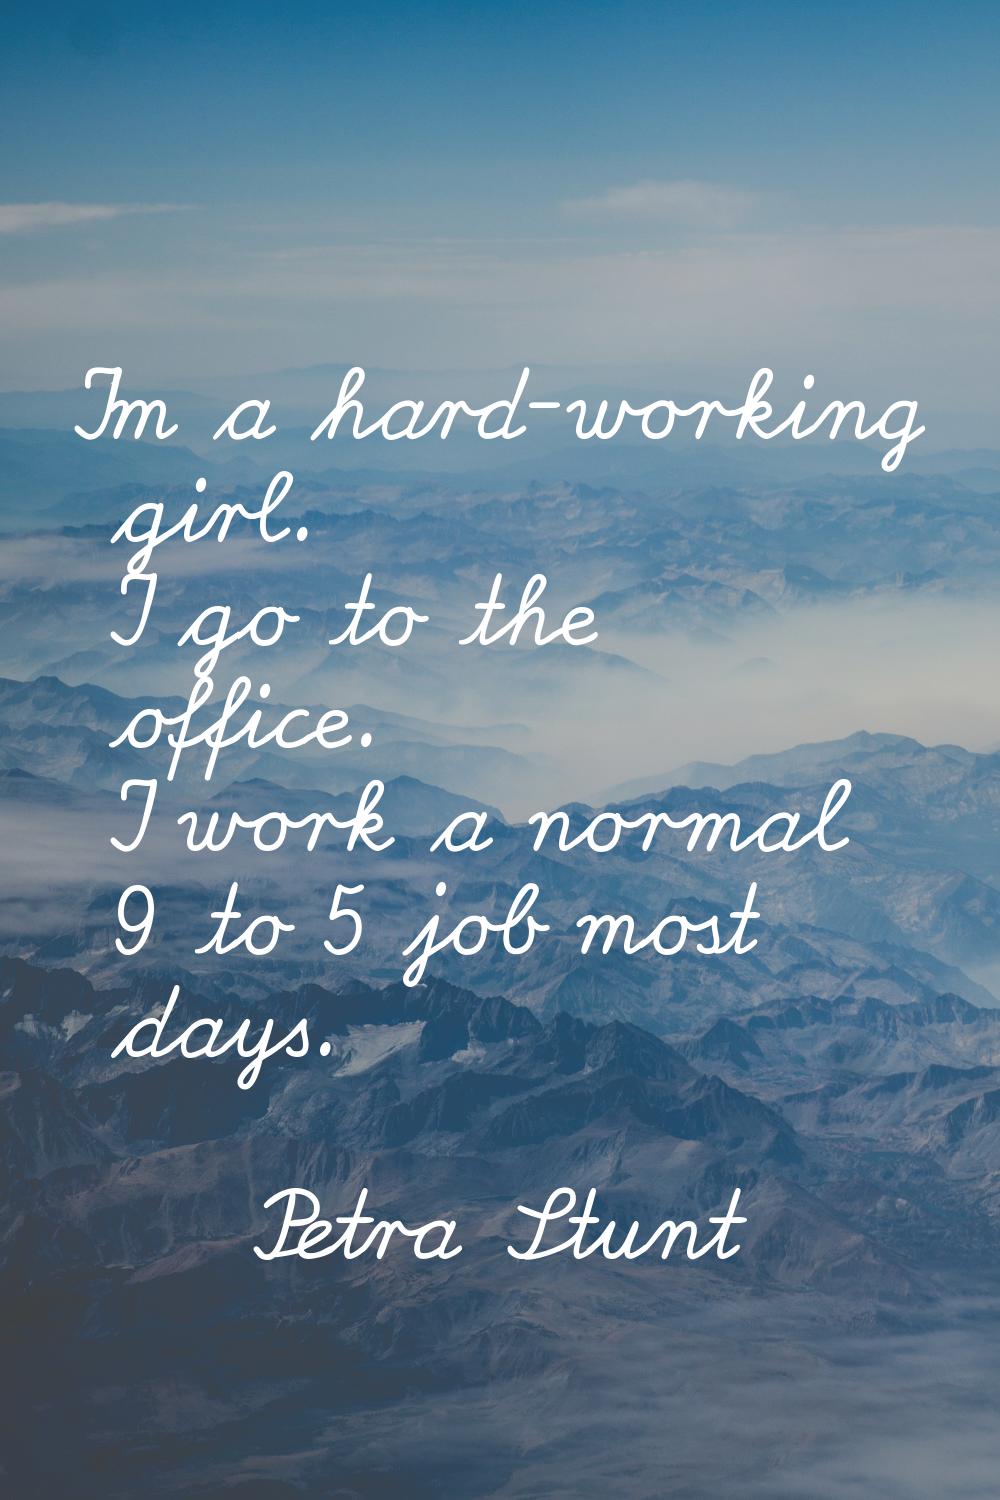 I'm a hard-working girl. I go to the office. I work a normal 9 to 5 job most days.